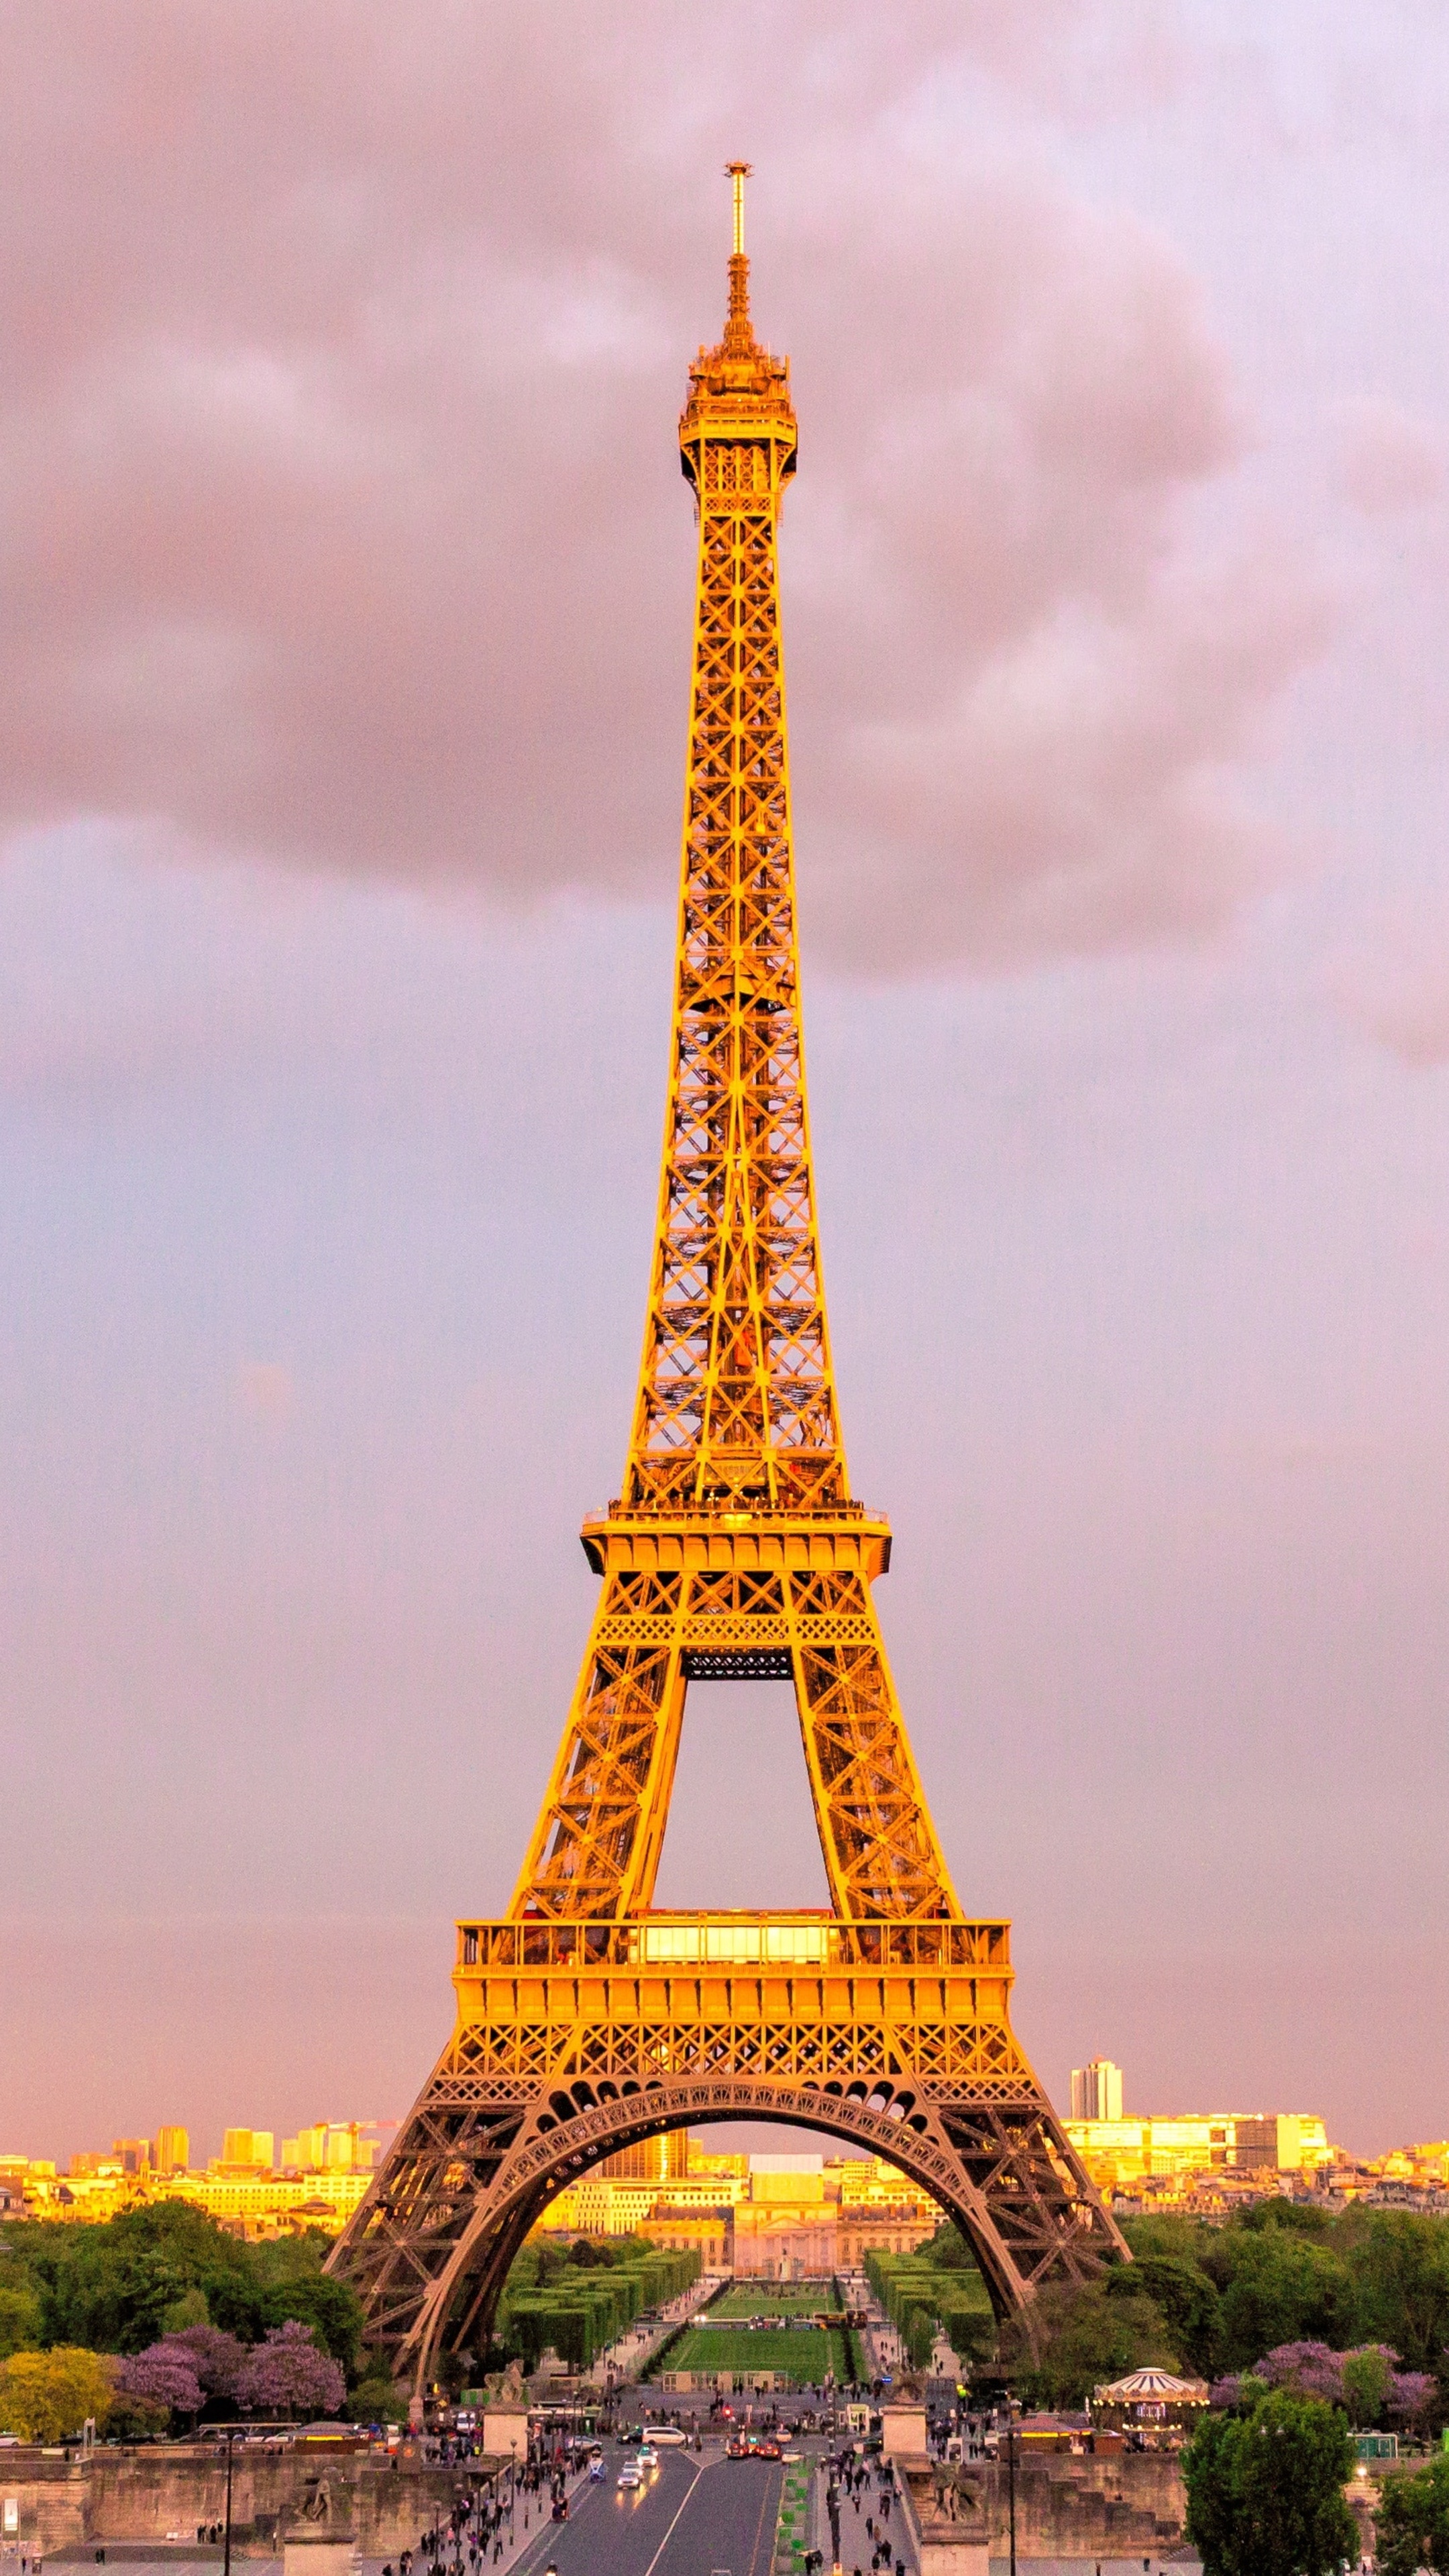 Paris: Named after the engineer Gustave Eiffel, whose company designed and built the tower. 2160x3840 4K Wallpaper.